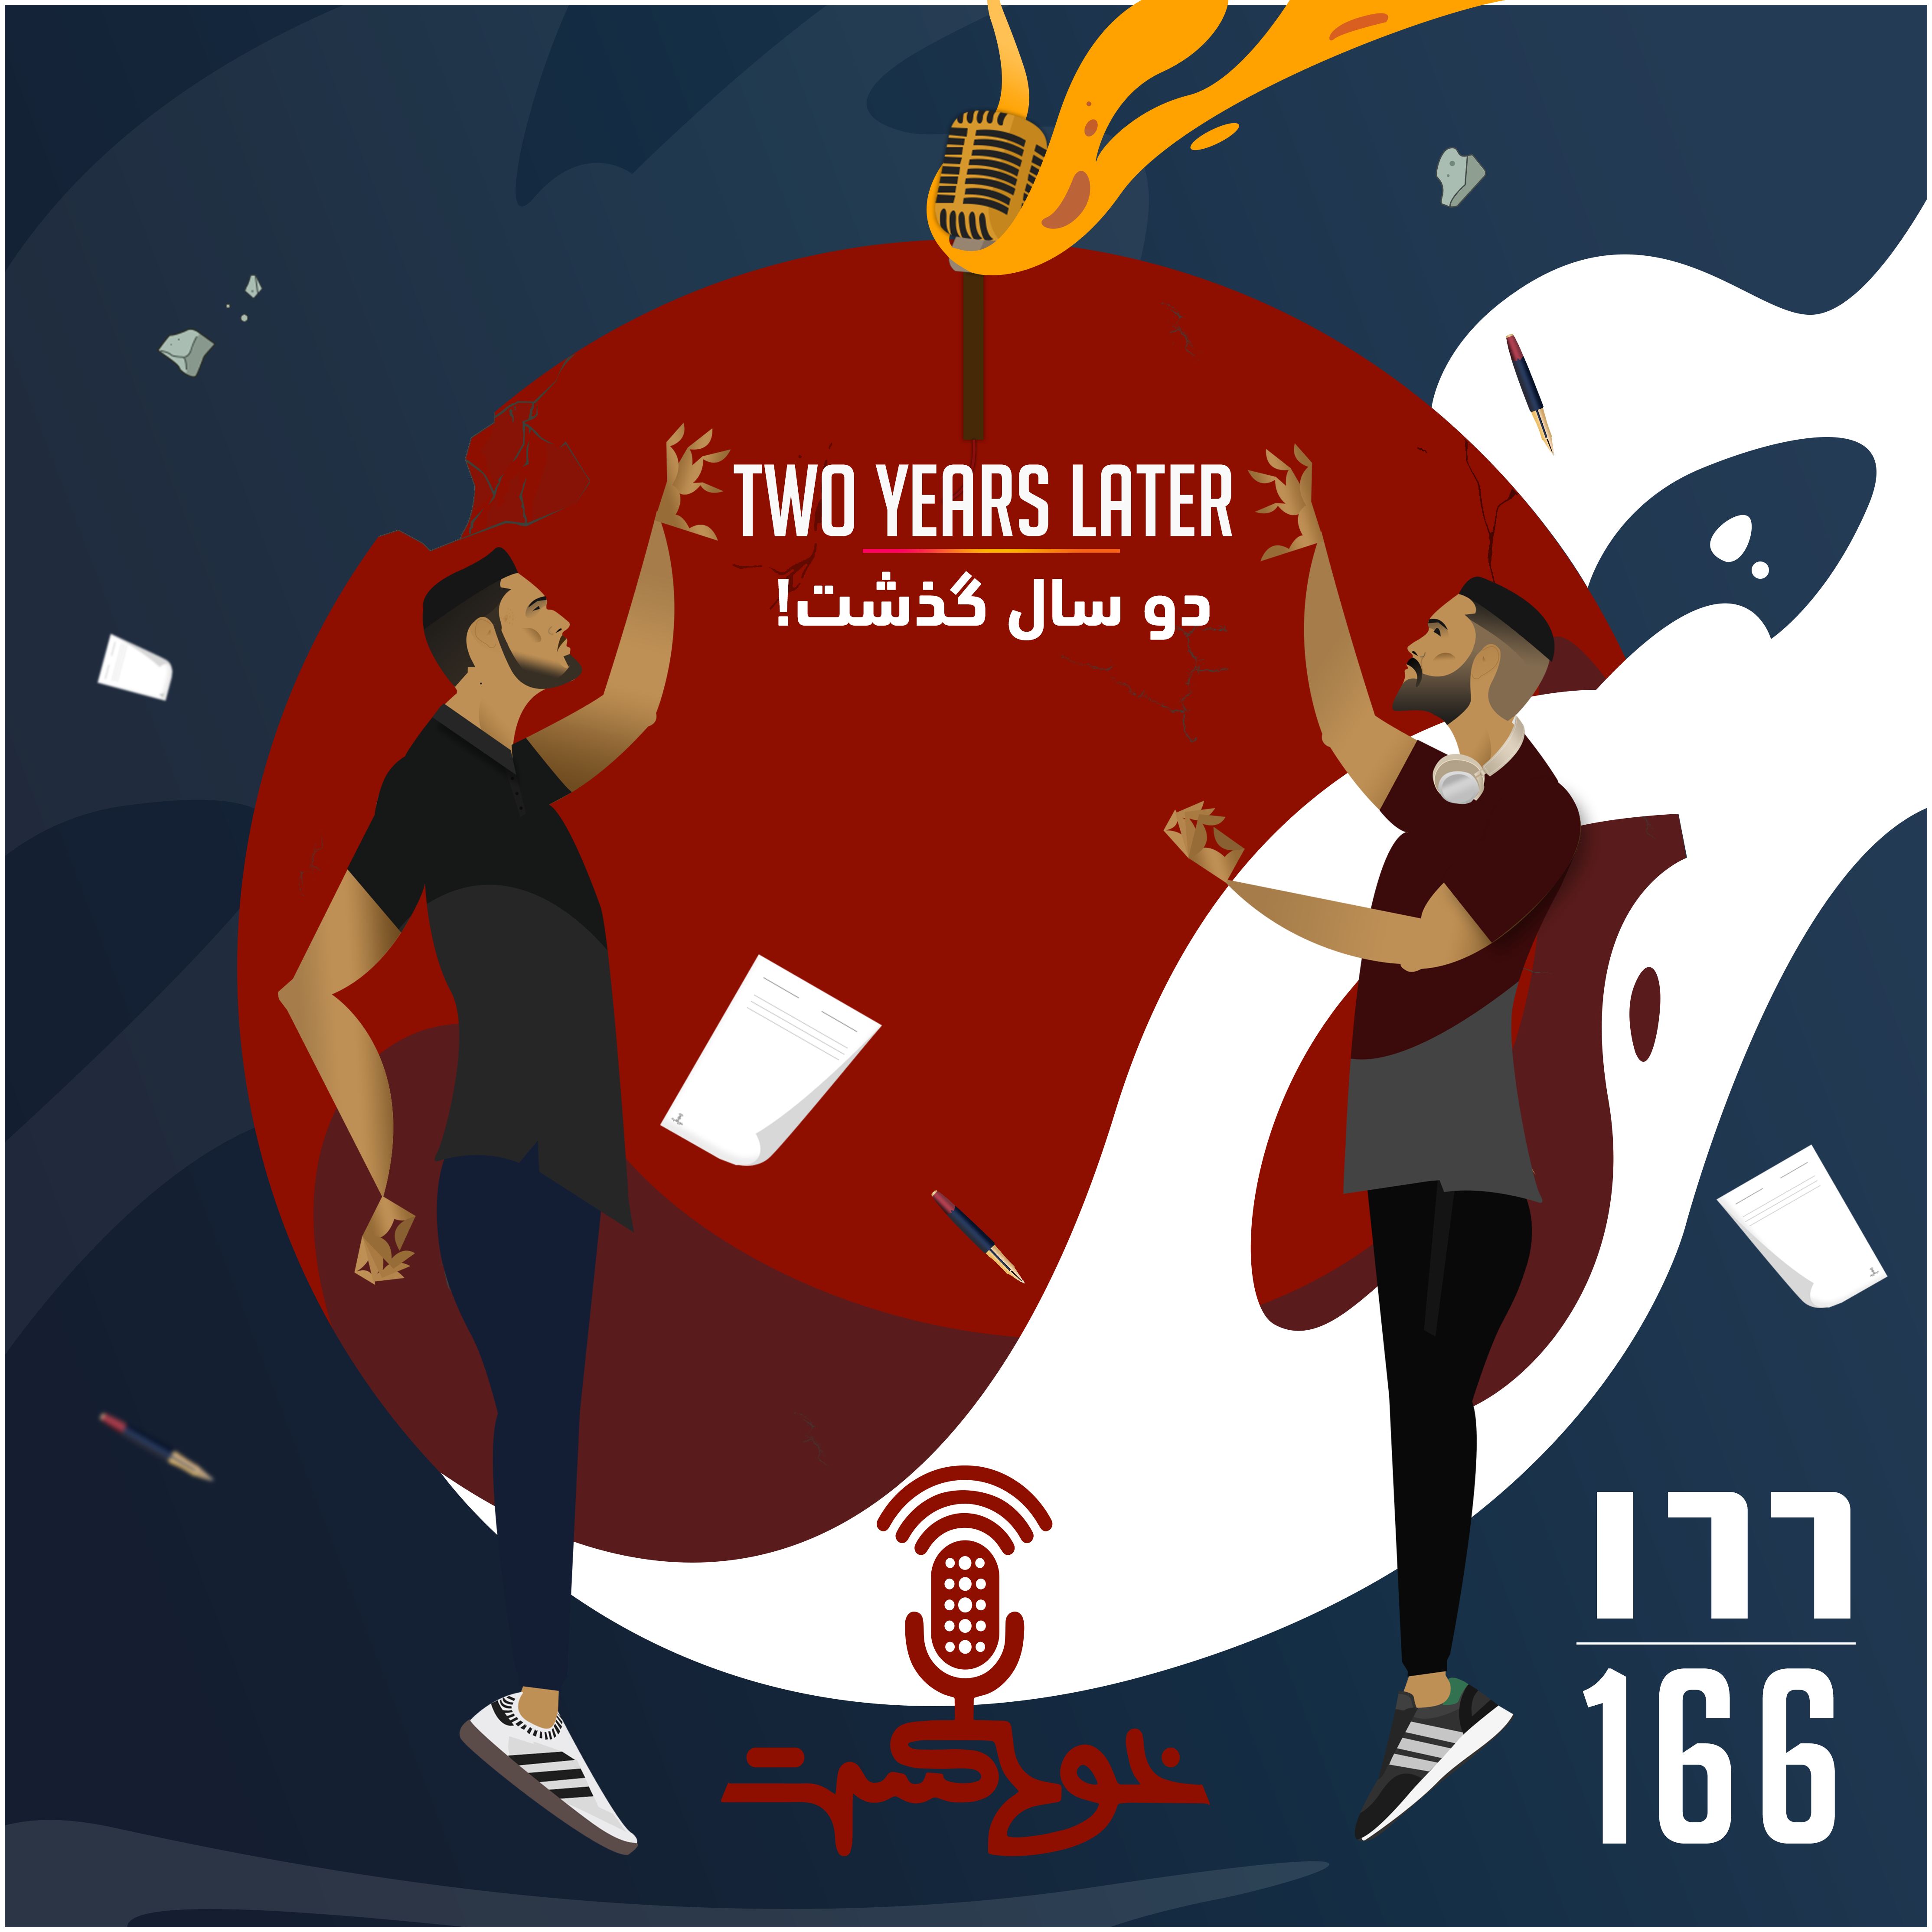 EP166 - Two Years Later - دو سال گذشت